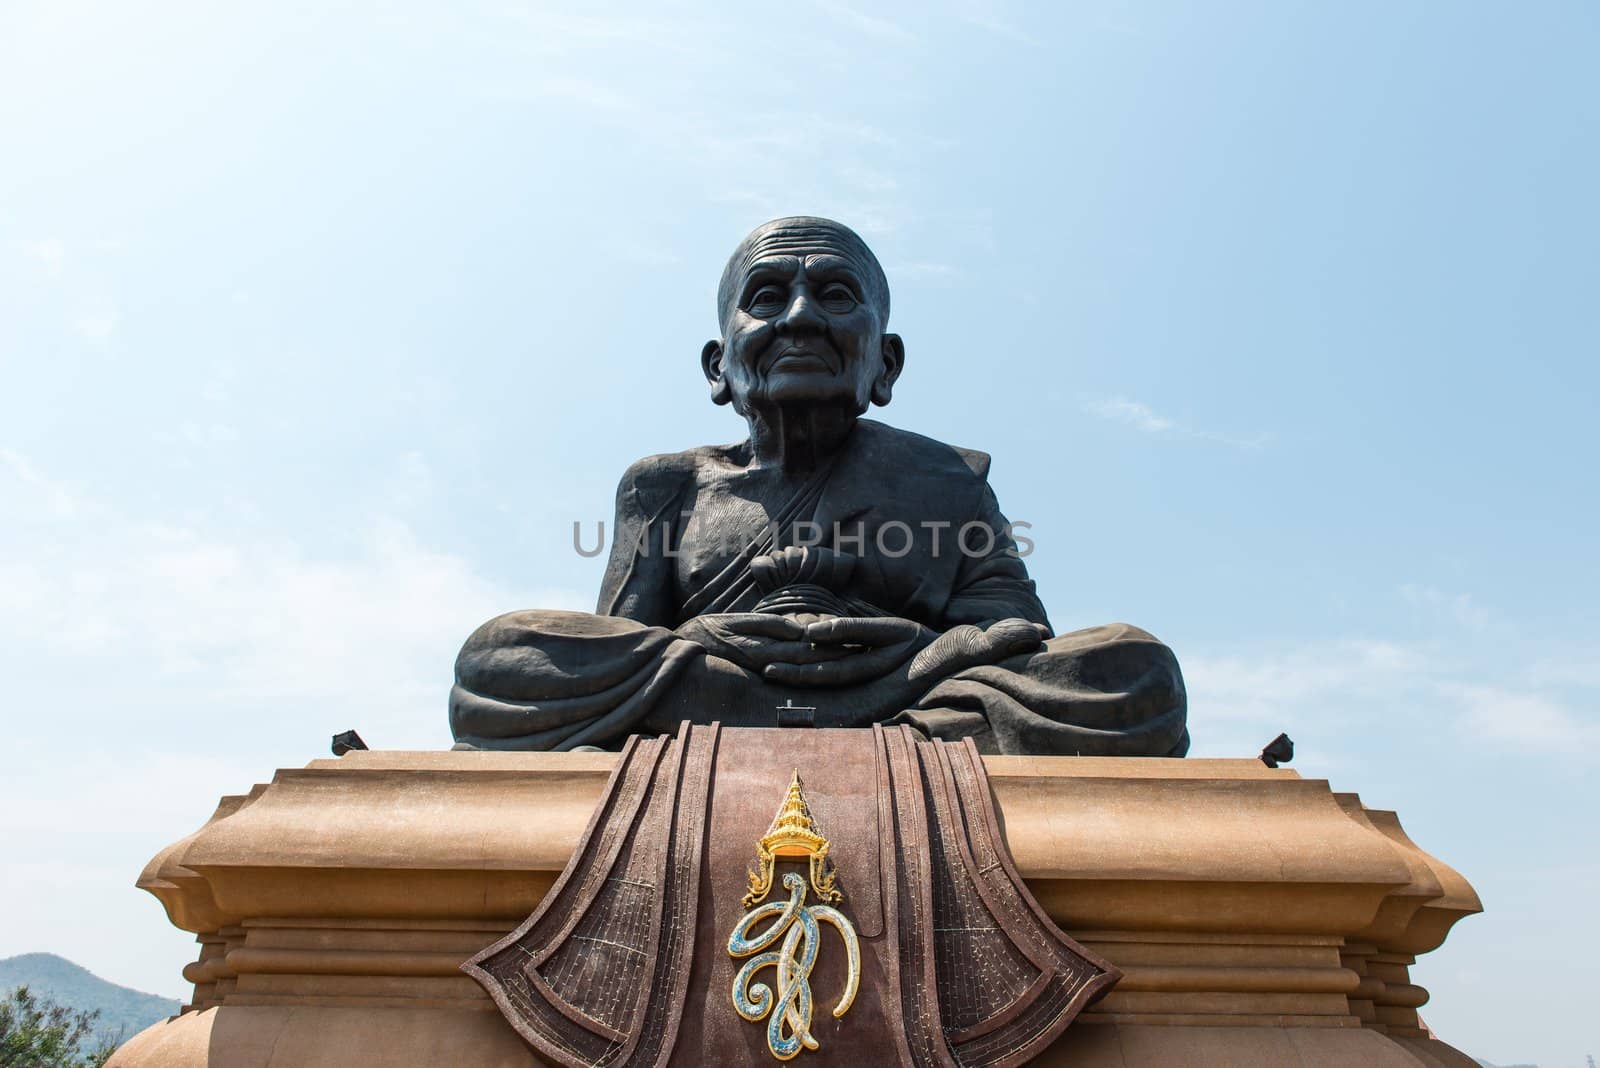 Large black great monk of thailand statue, taken on a sunny day